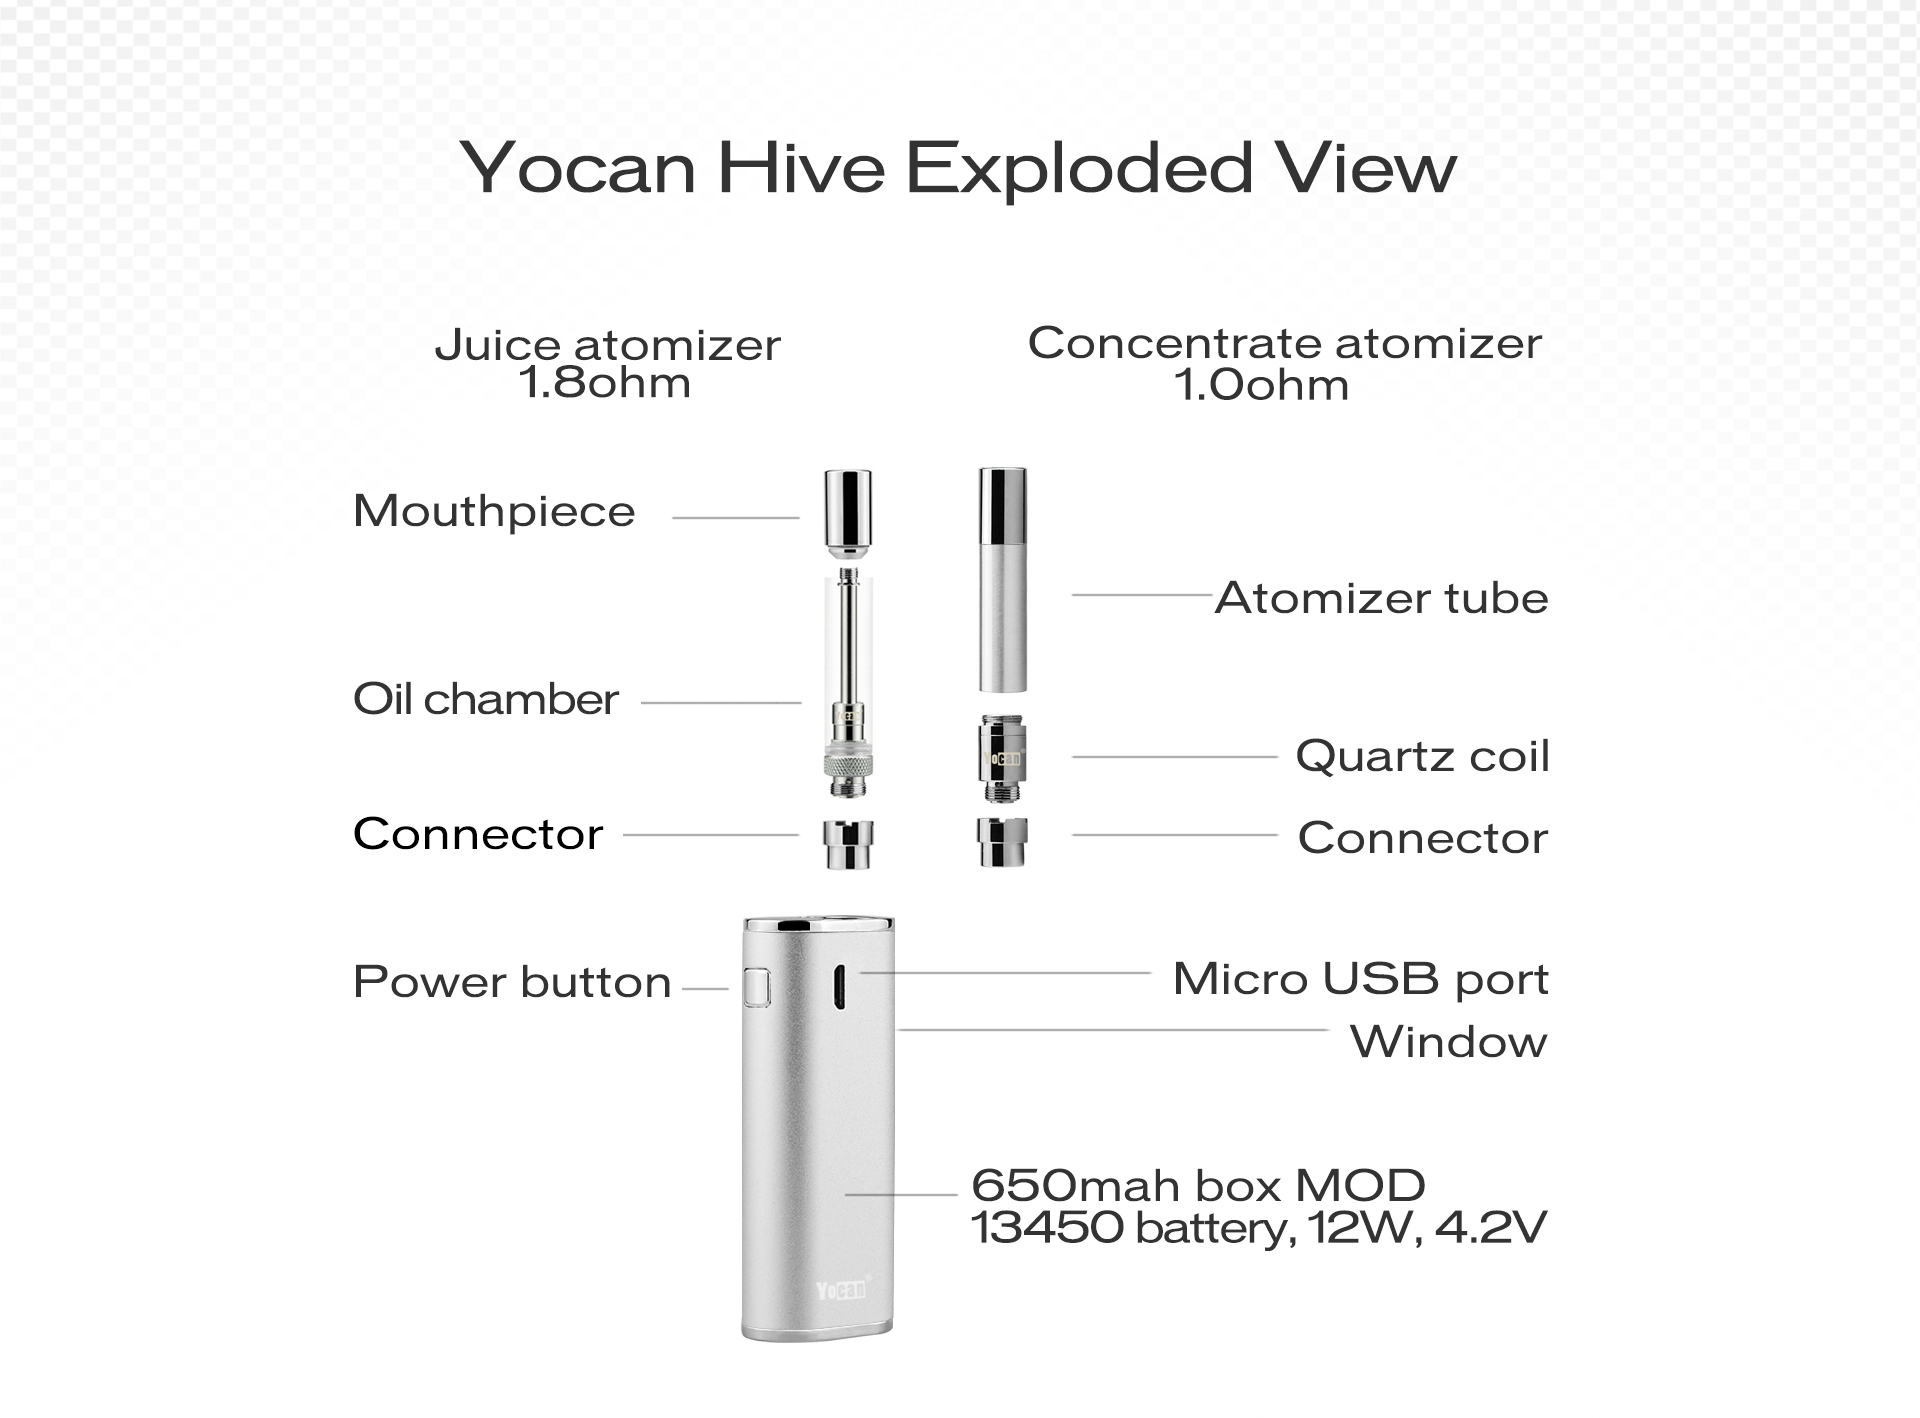 The Yocan Hive 2-in-1 multi-vaporizer pen kit exploded view.